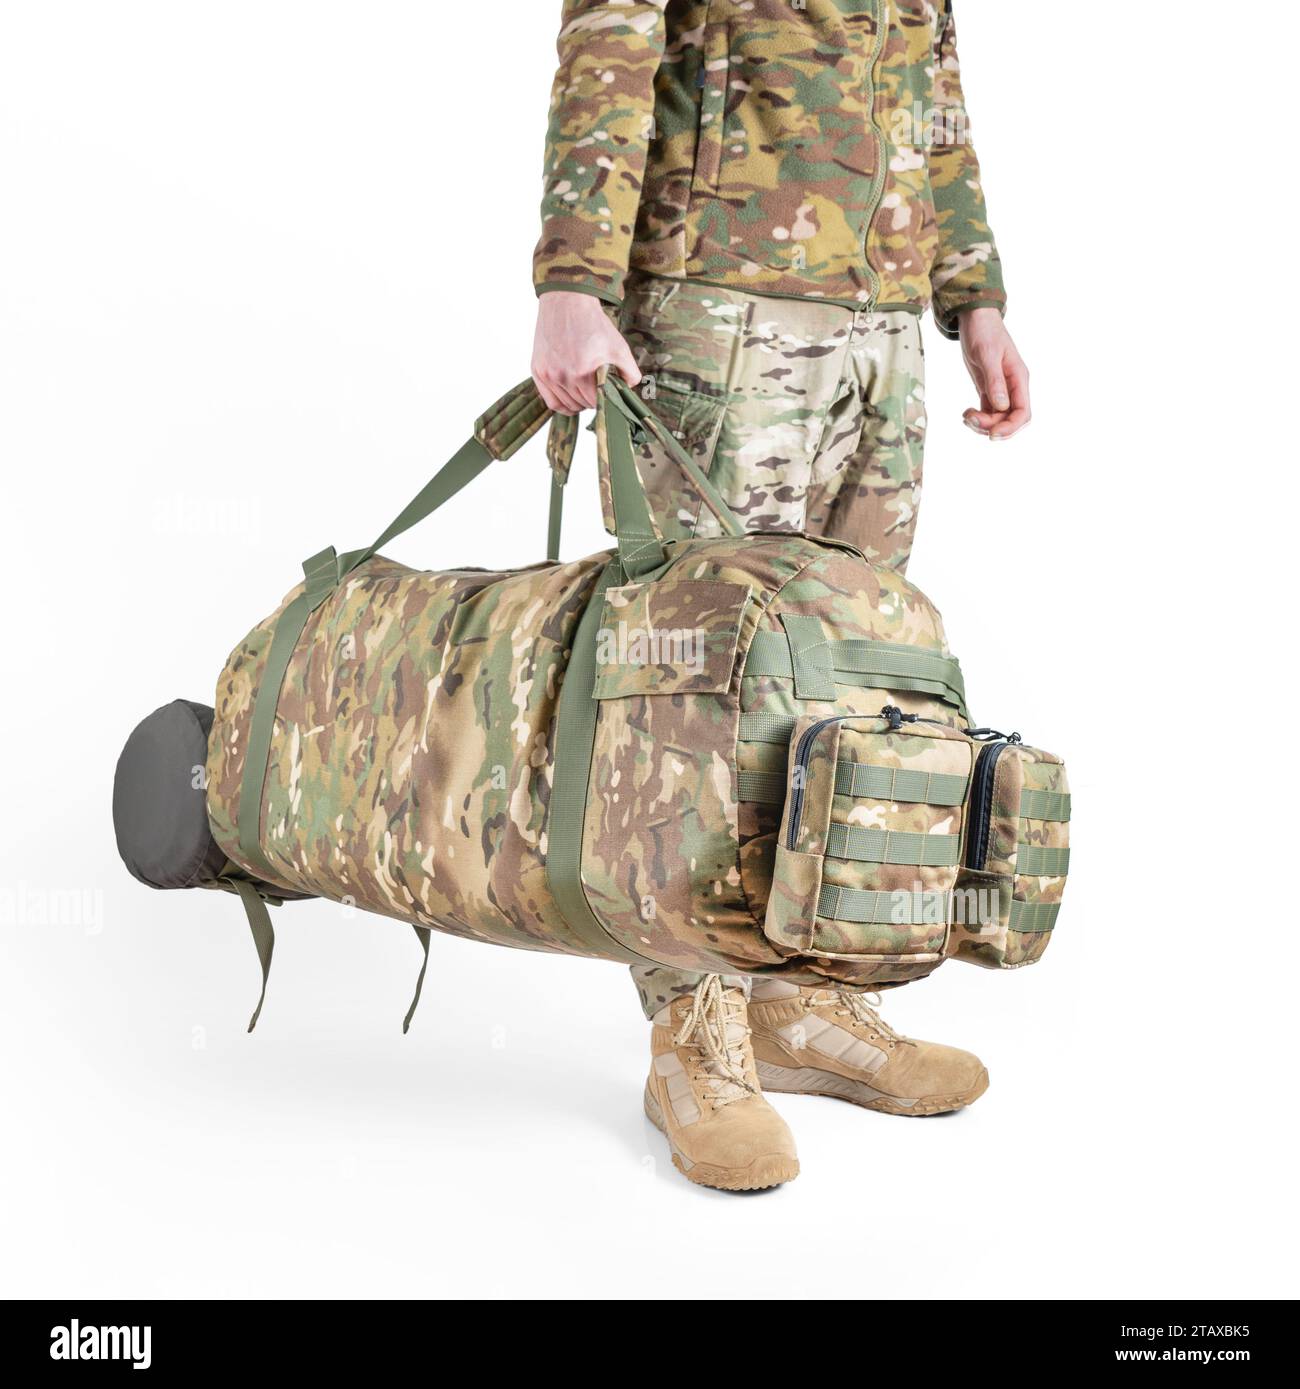 Soldier in a military uniform holds camouflage bag in his hands on white background. Armed forces concept. Stock Photo